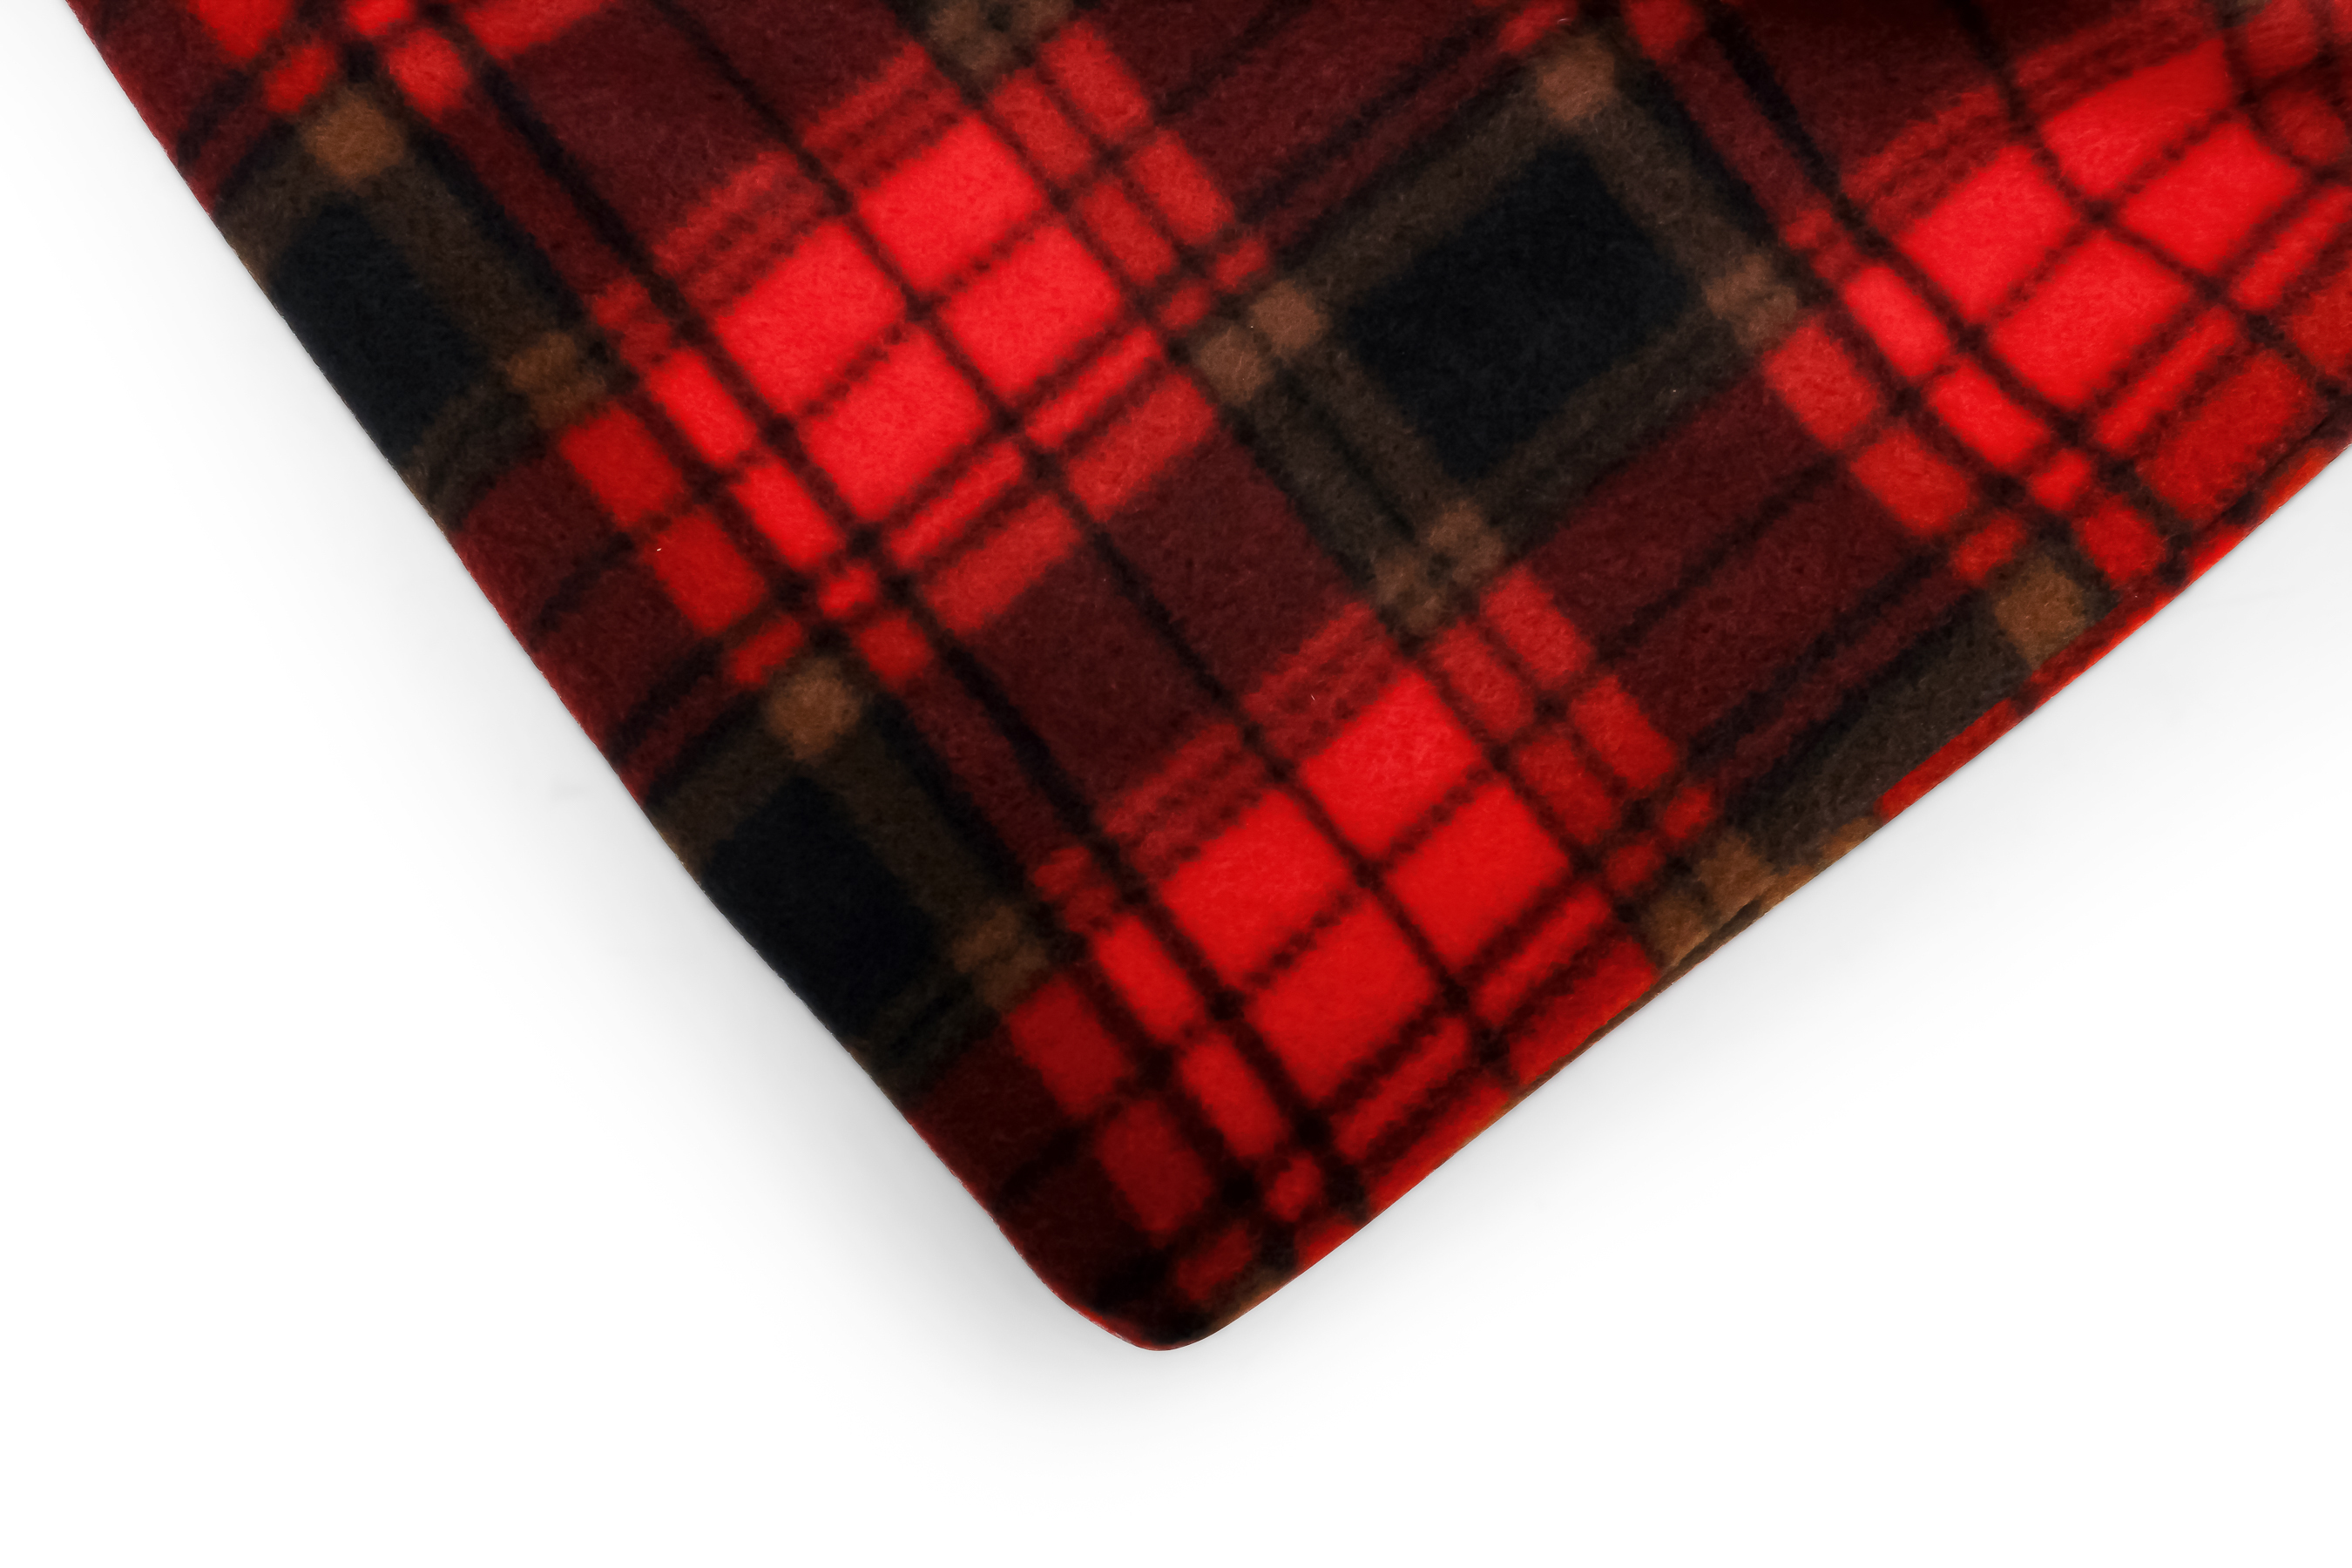 Camco Heated Blanket for RVs, Camping, Traveling, and More | Ideal for Cold Nights, Relieving Aches and Pain | 100% Polar Fleece | Red/Black Plaid (42804) - image 3 of 7